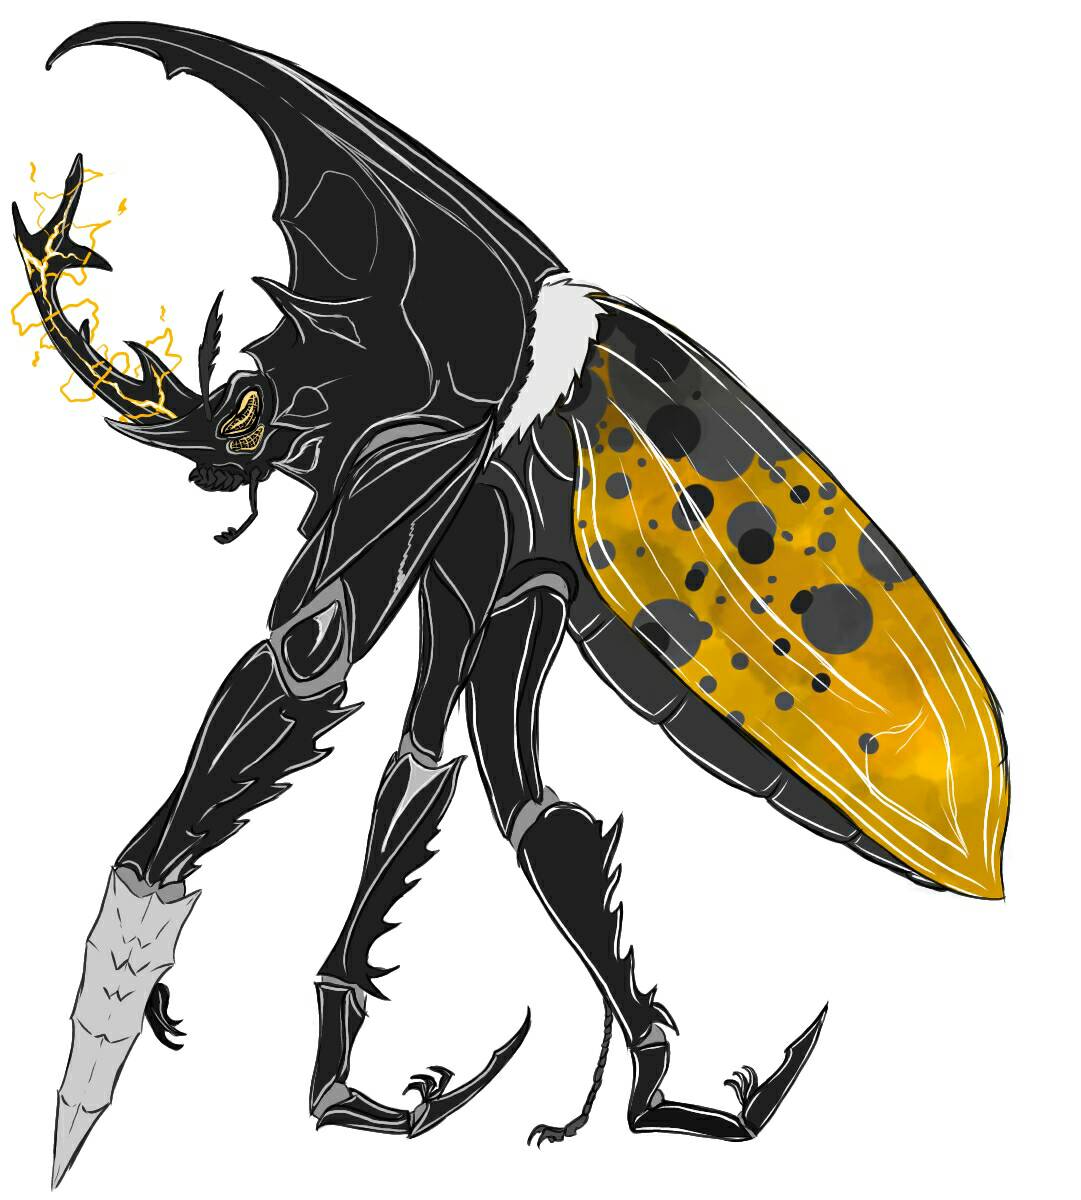 Redesign Megalon by nay0225 on DeviantArt